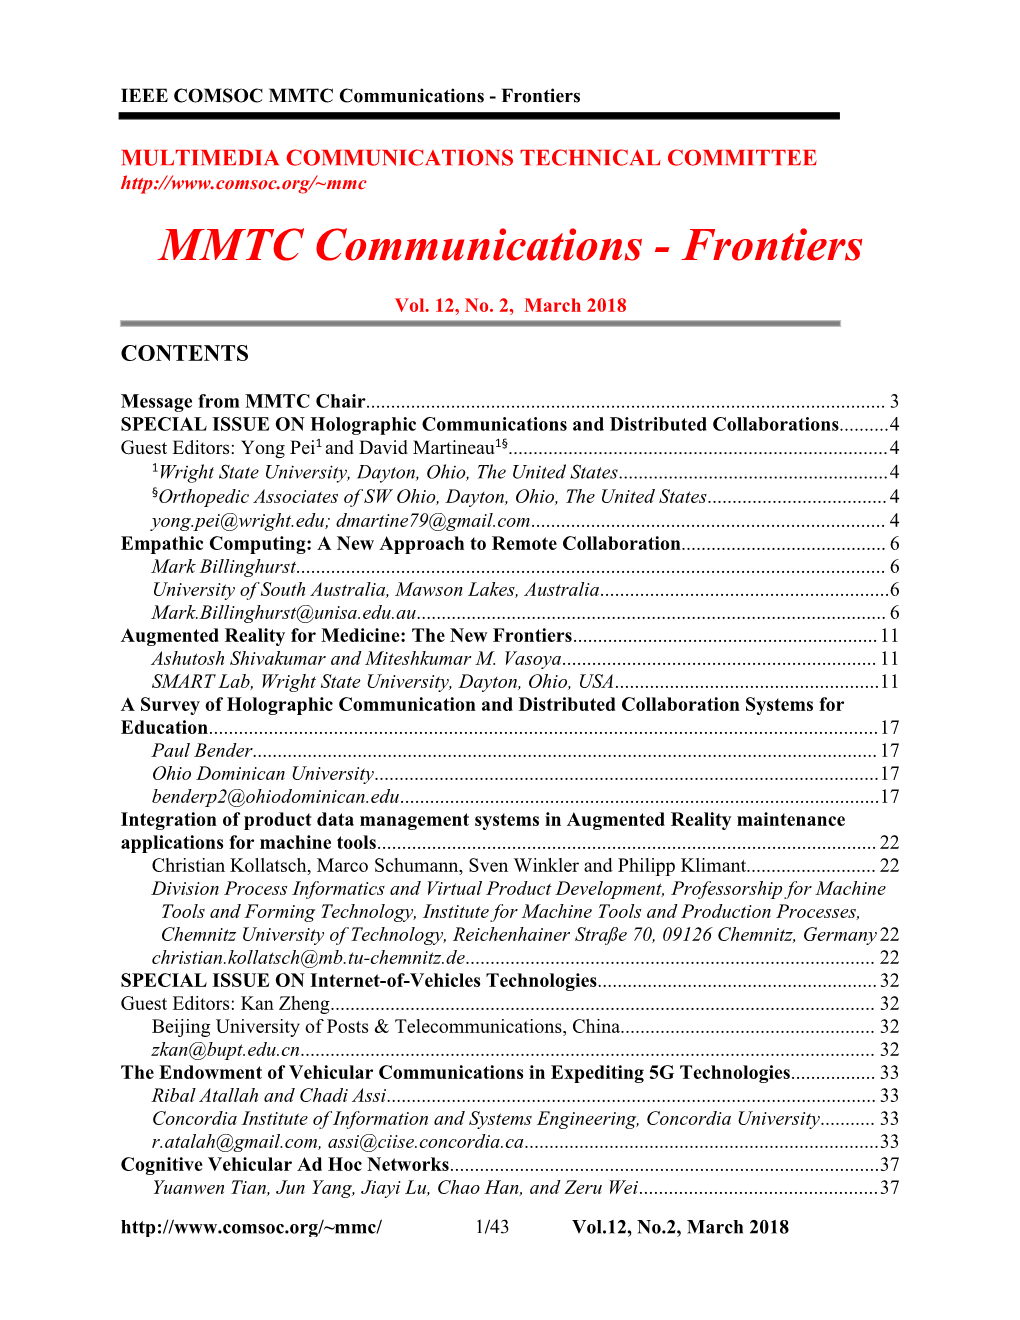 MMTC Communications - Frontiers